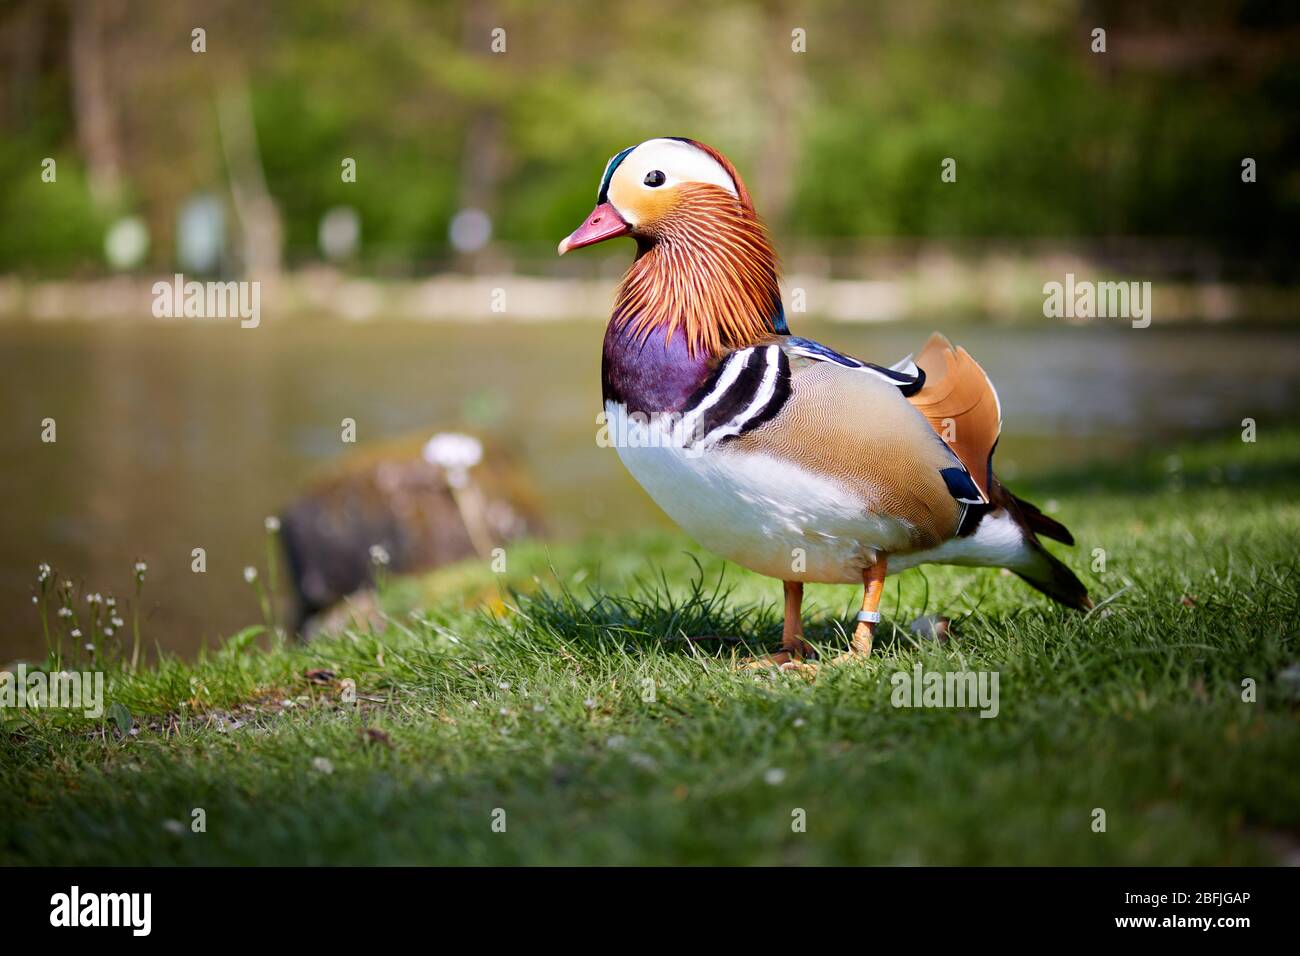 Mandarin duck walking and standing in the meadows on the gras near the pond Stock Photo